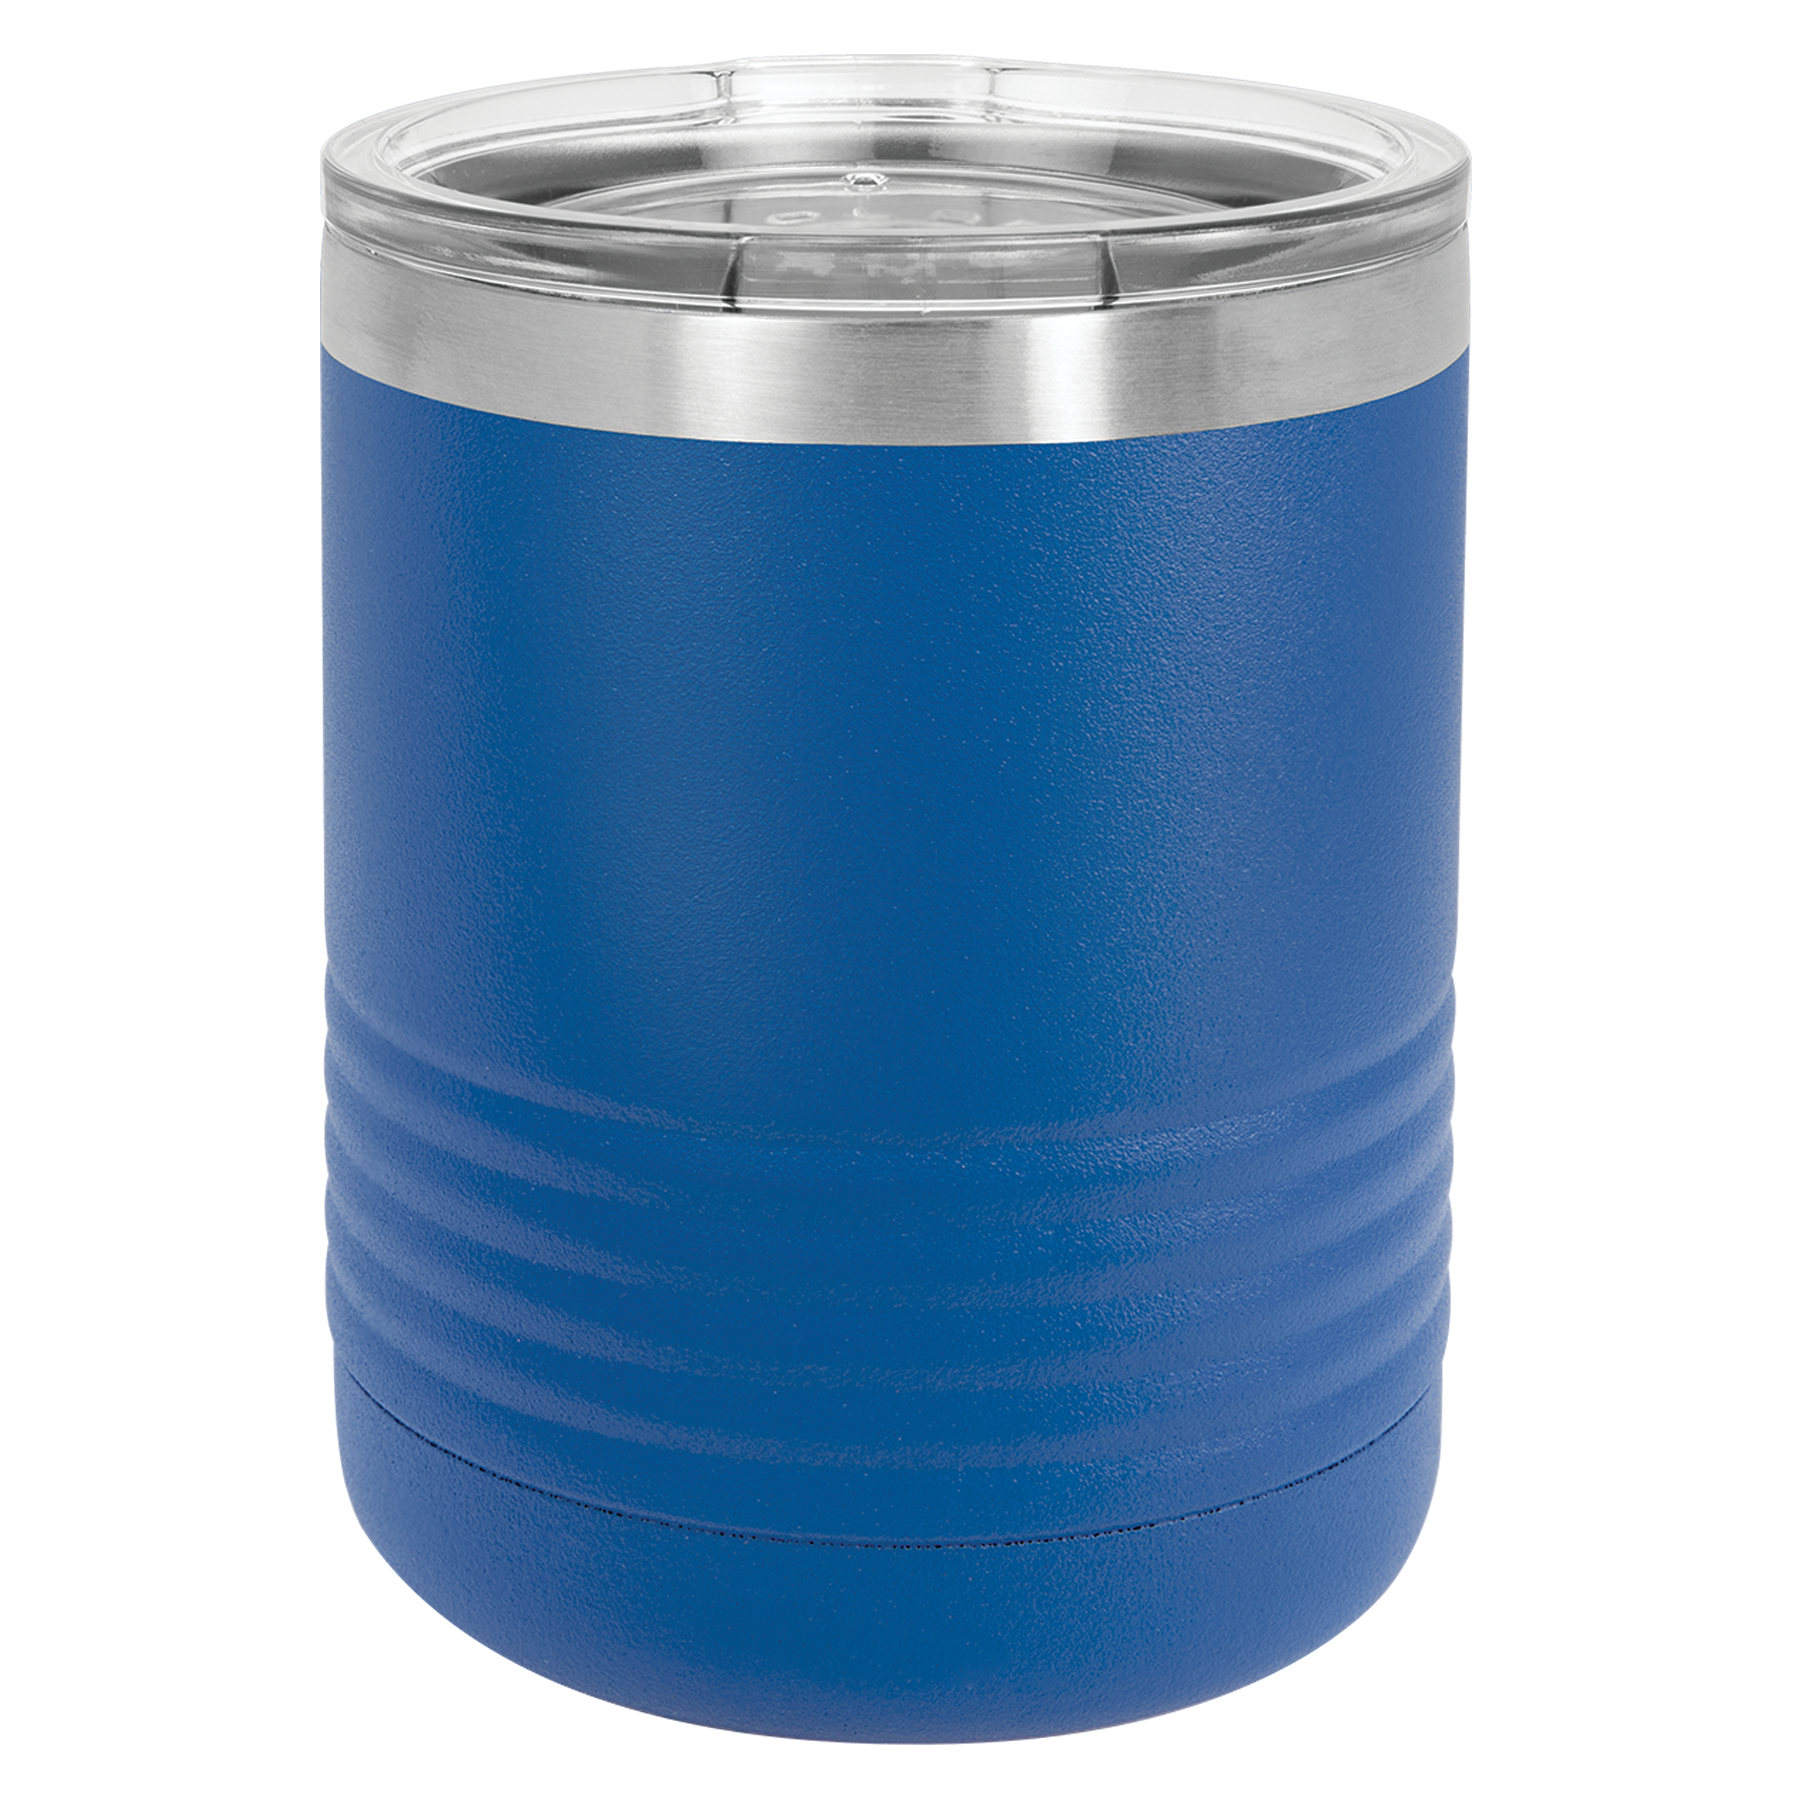 Engraved Blue 10 oz. Lowball Tumbler. Double-wall vacuum insulation with a clear lid. It is 2X heat & cold resistant. Is lead free. Polar Camels are made from 18/8 gauge stainless steel (18% chromium/8% nickel) - also known as Type 304 Food Grade. Great Corporate Gift